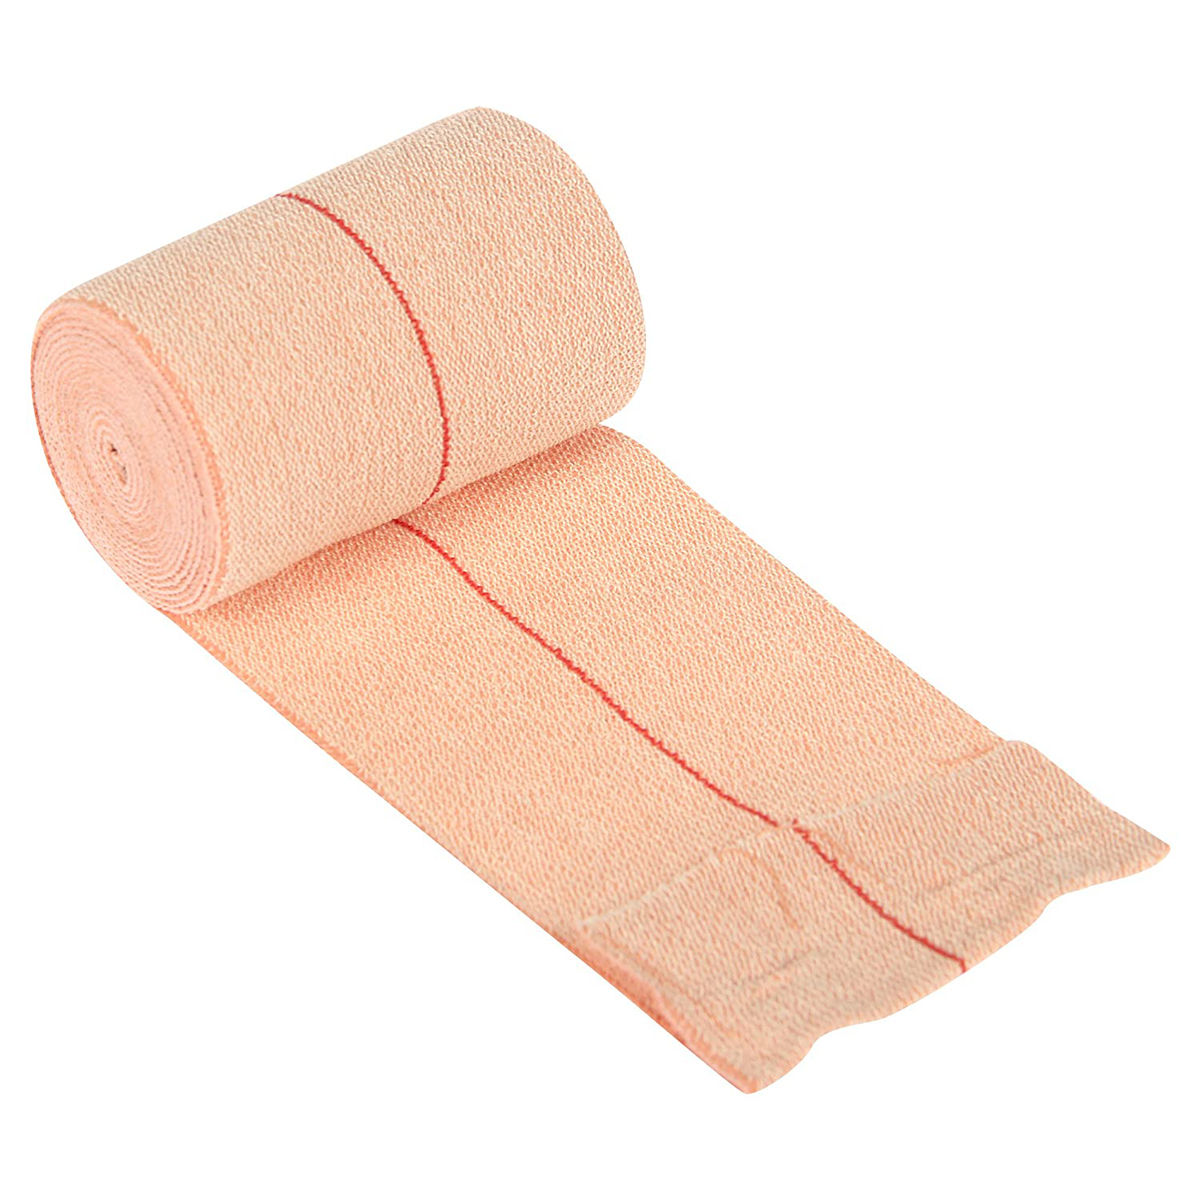 Doctor's Choice Elastic Crepe Bandage 8 cm x 4 m, 1 Count, Pack of 1 